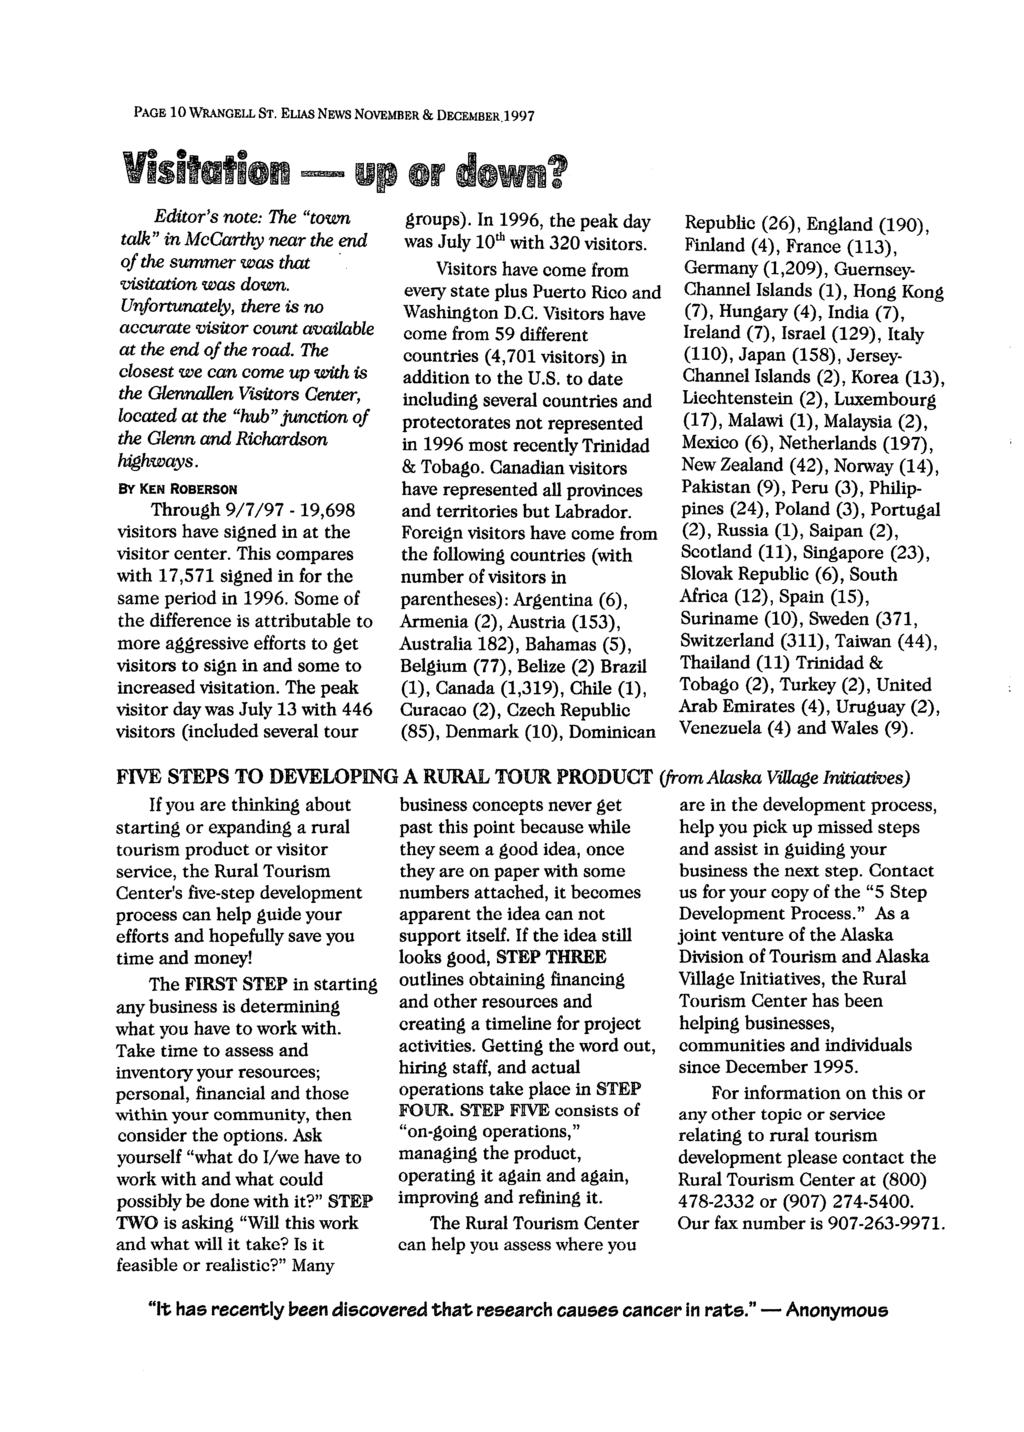 PAGE 10 WRANGELL ST. ELIAS NEWS NOVEMBER & DECEMBER.1997 Visitation - Editor's note: '11!.e "town talk" in McCarthy near the end of the summer was that 'Visitation was down.